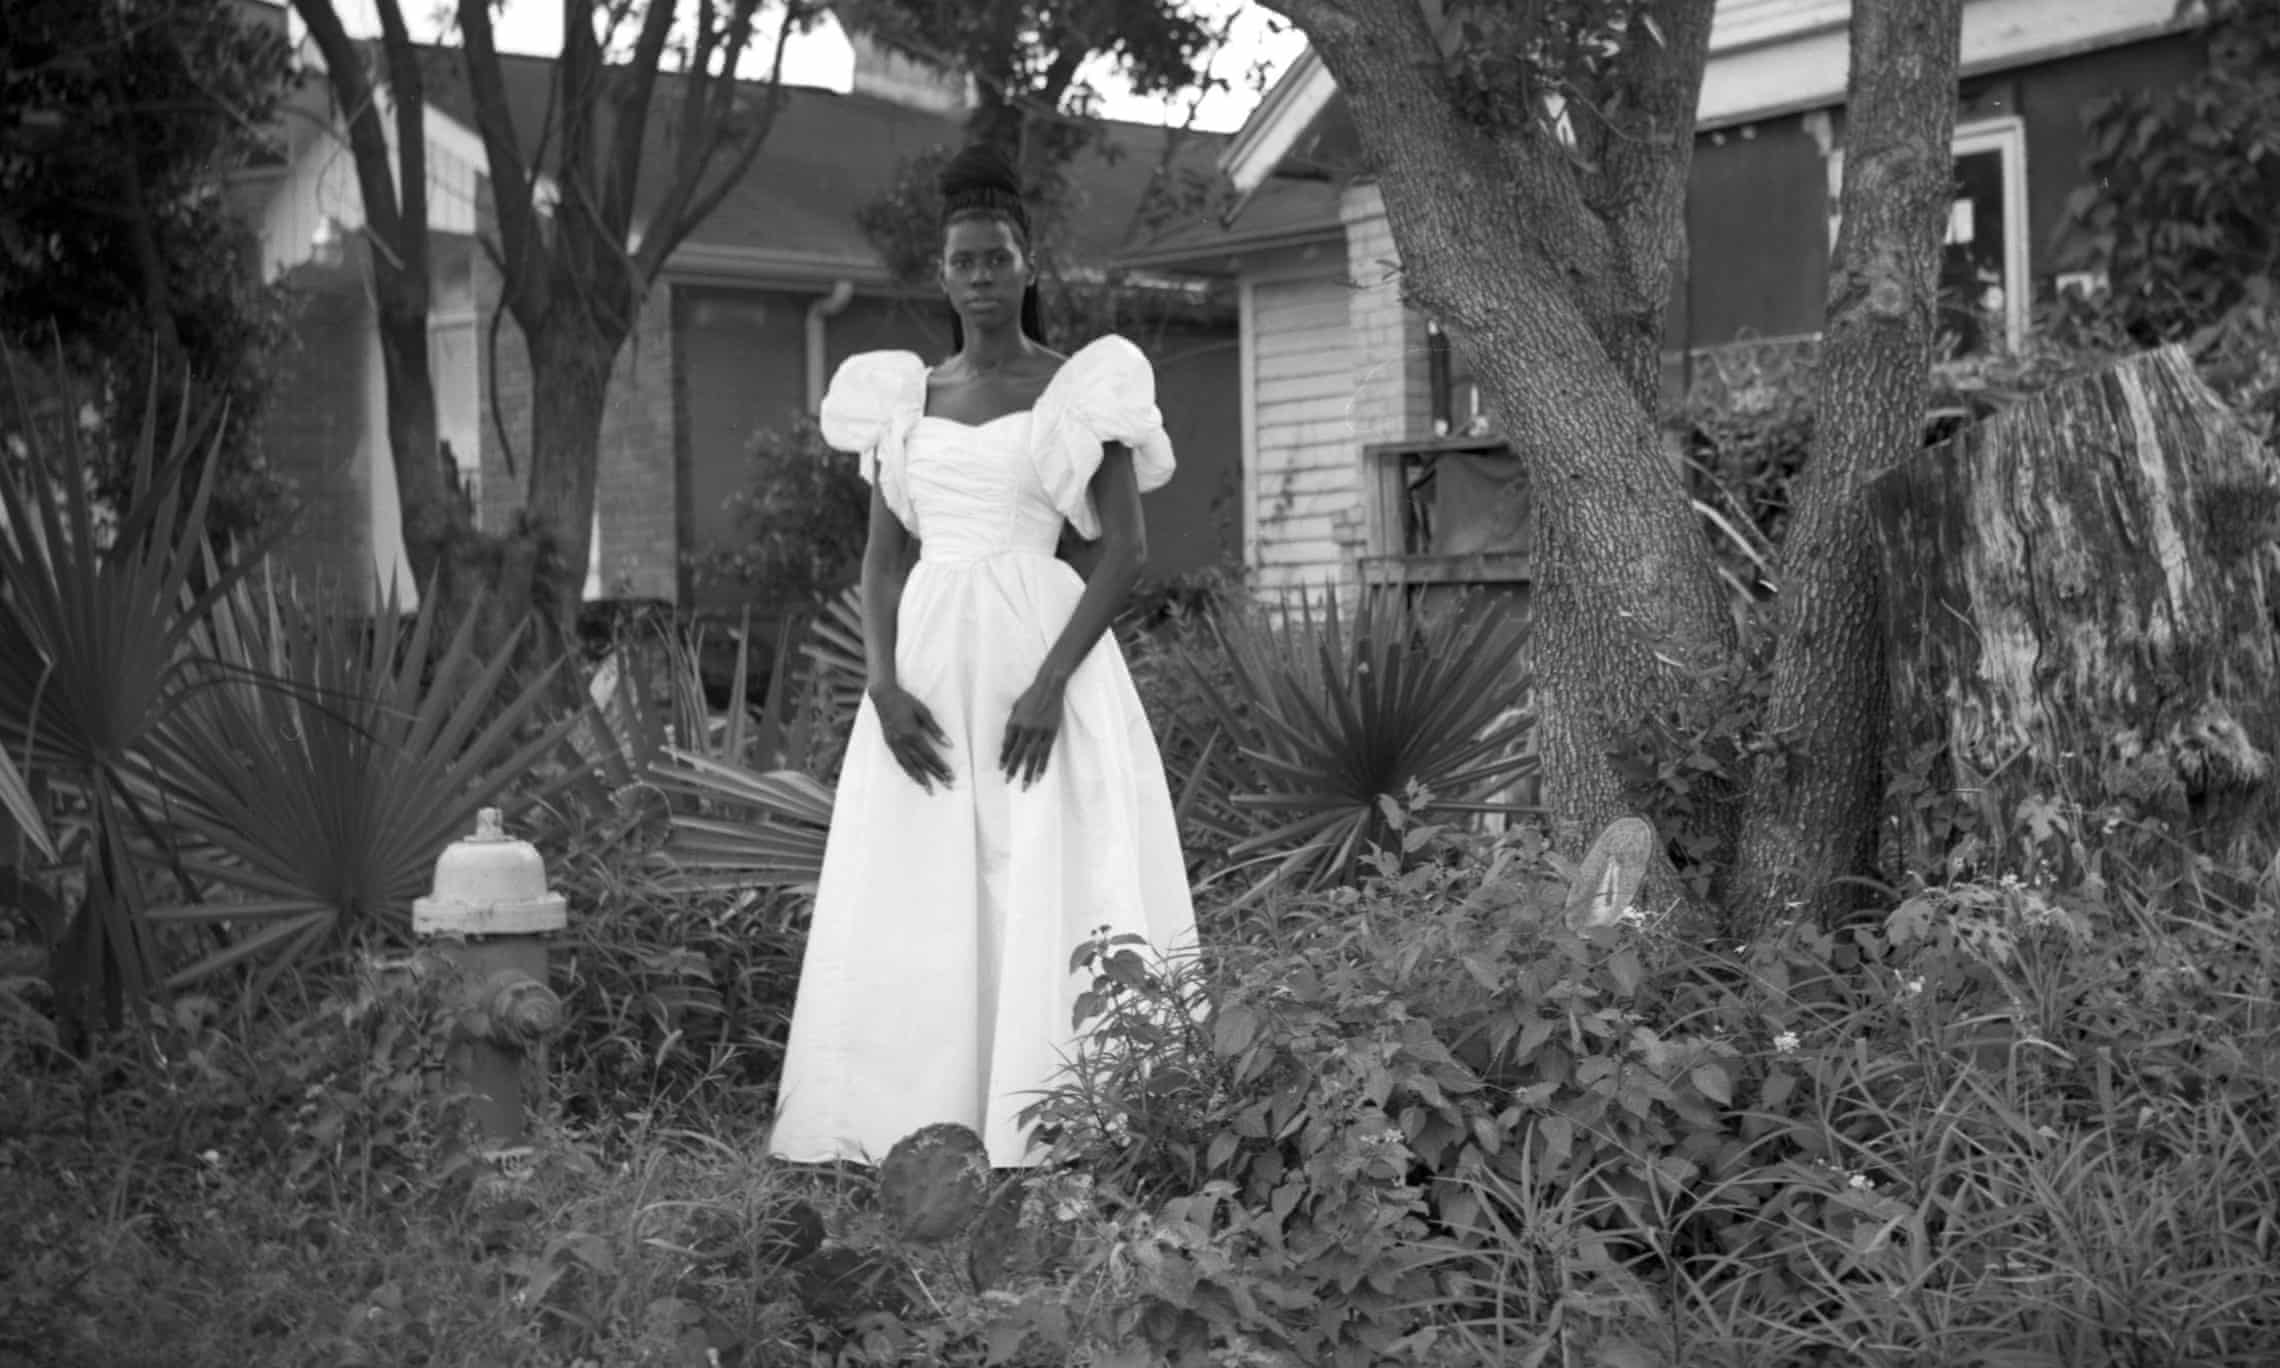 A black and white photo in which a young black woman, her hair piled up and dressed in a long white dress, gazes directly at the camera against a background of a clapboard house, palm trees, and - oddly - a fire hydrant